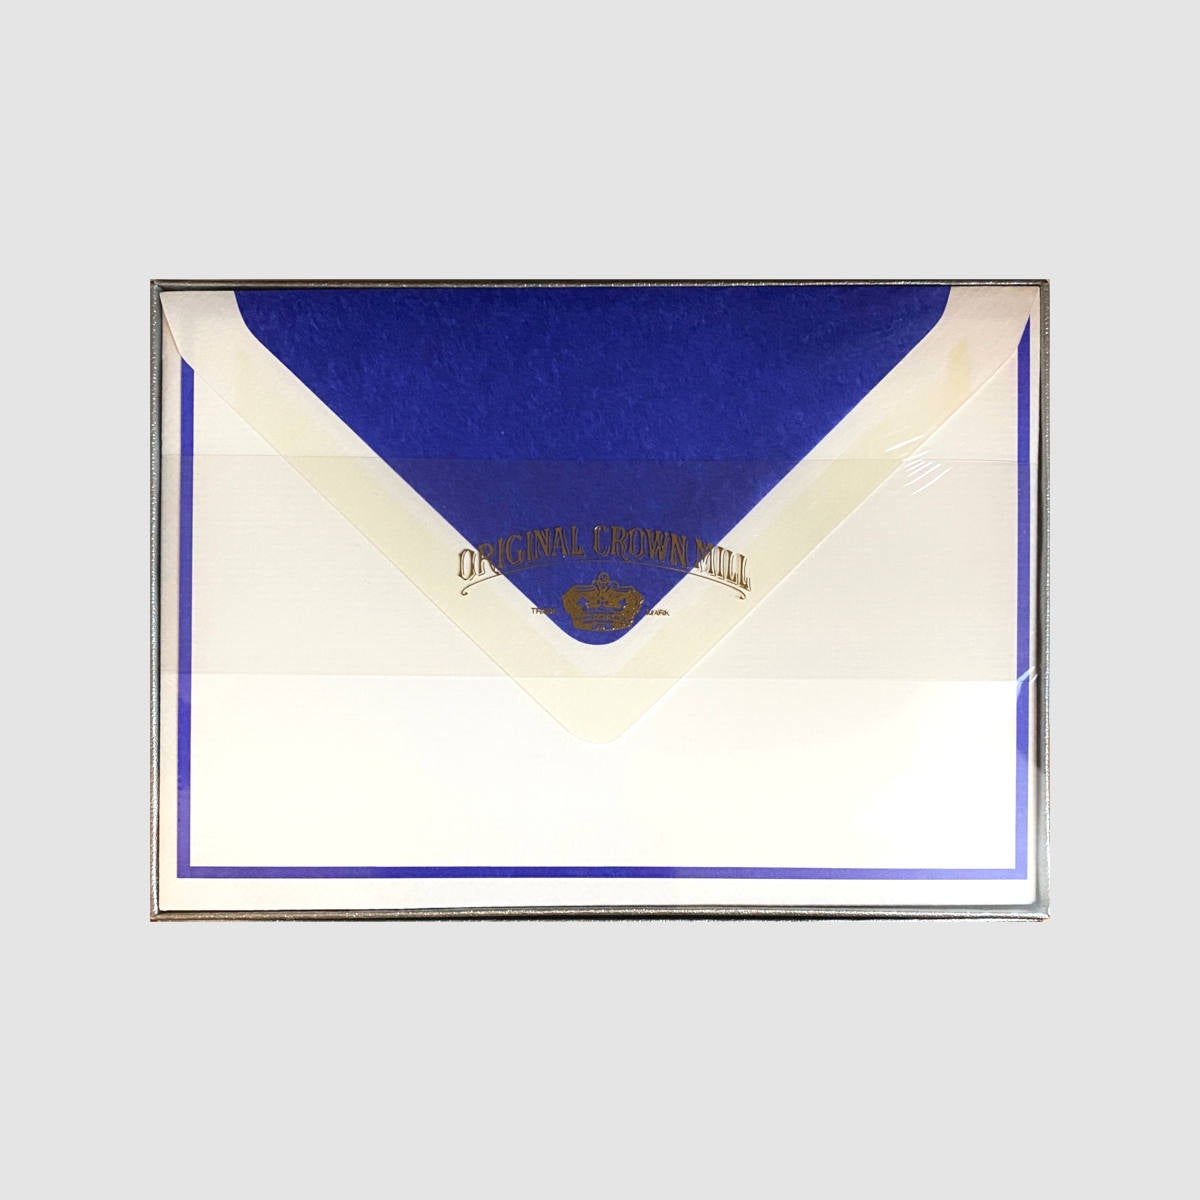 Boxed Card and Envelope Set - White/Royal Blue - Original Crown Mill